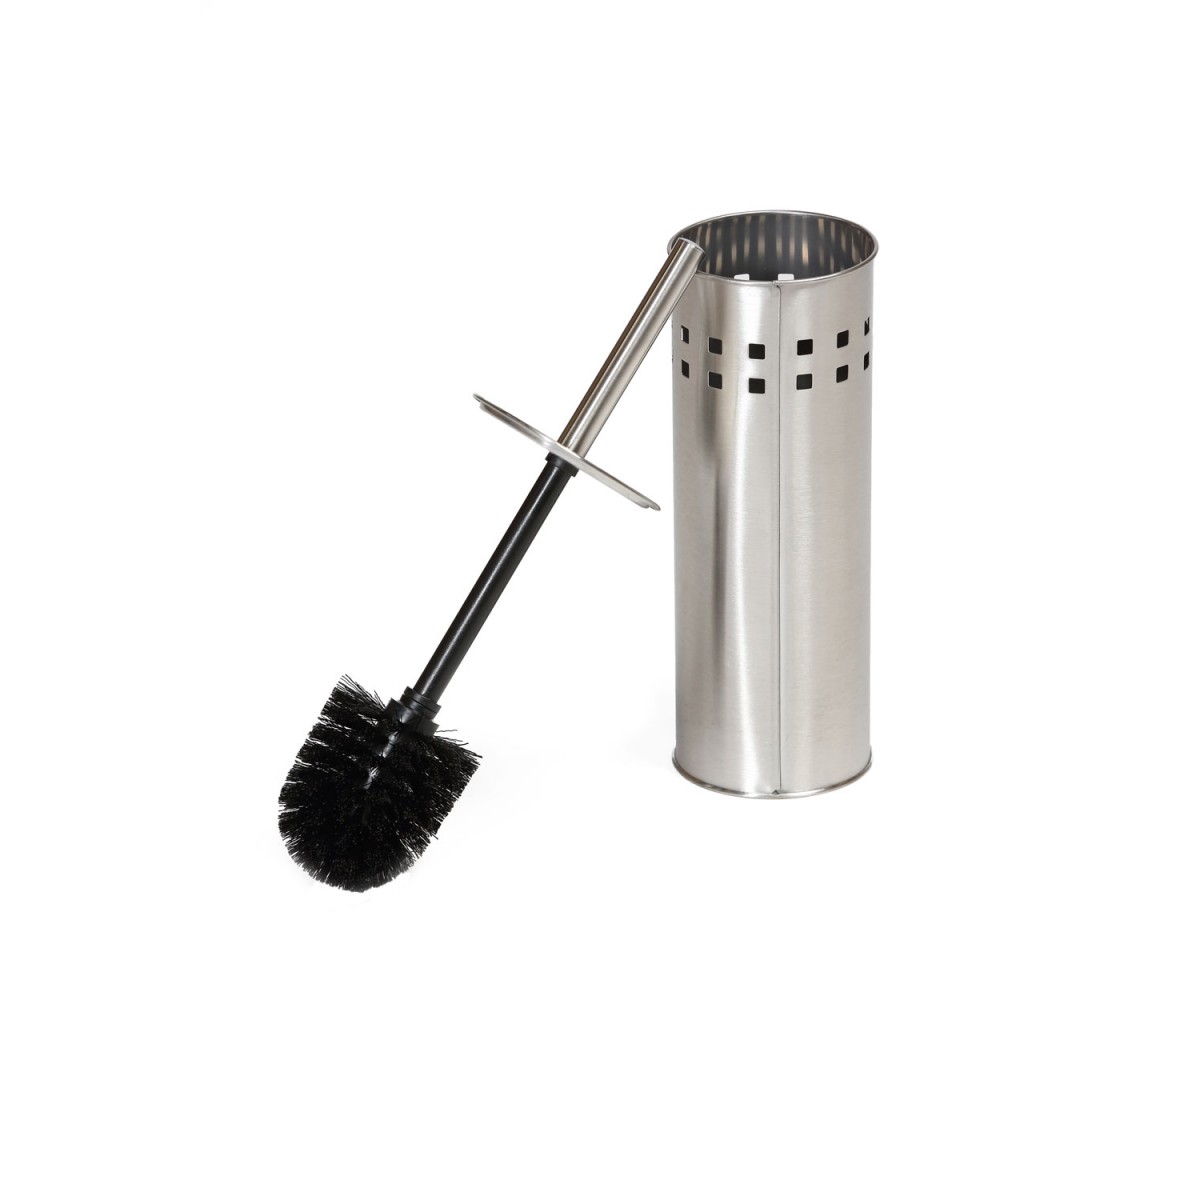 Brosse wc avec support